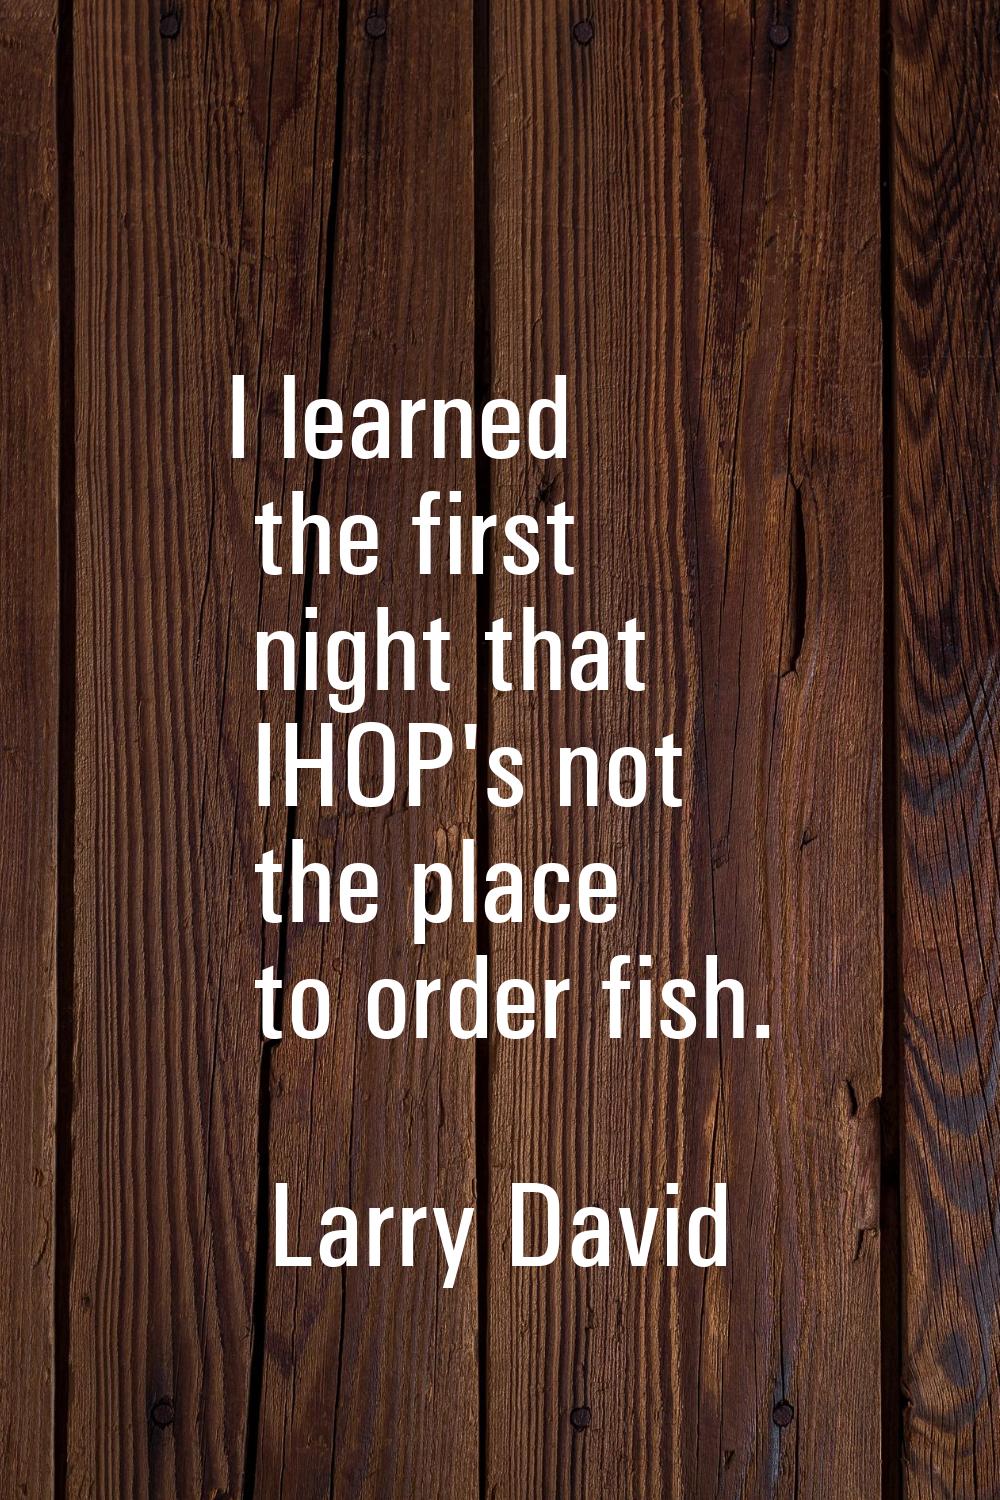 I learned the first night that IHOP's not the place to order fish.